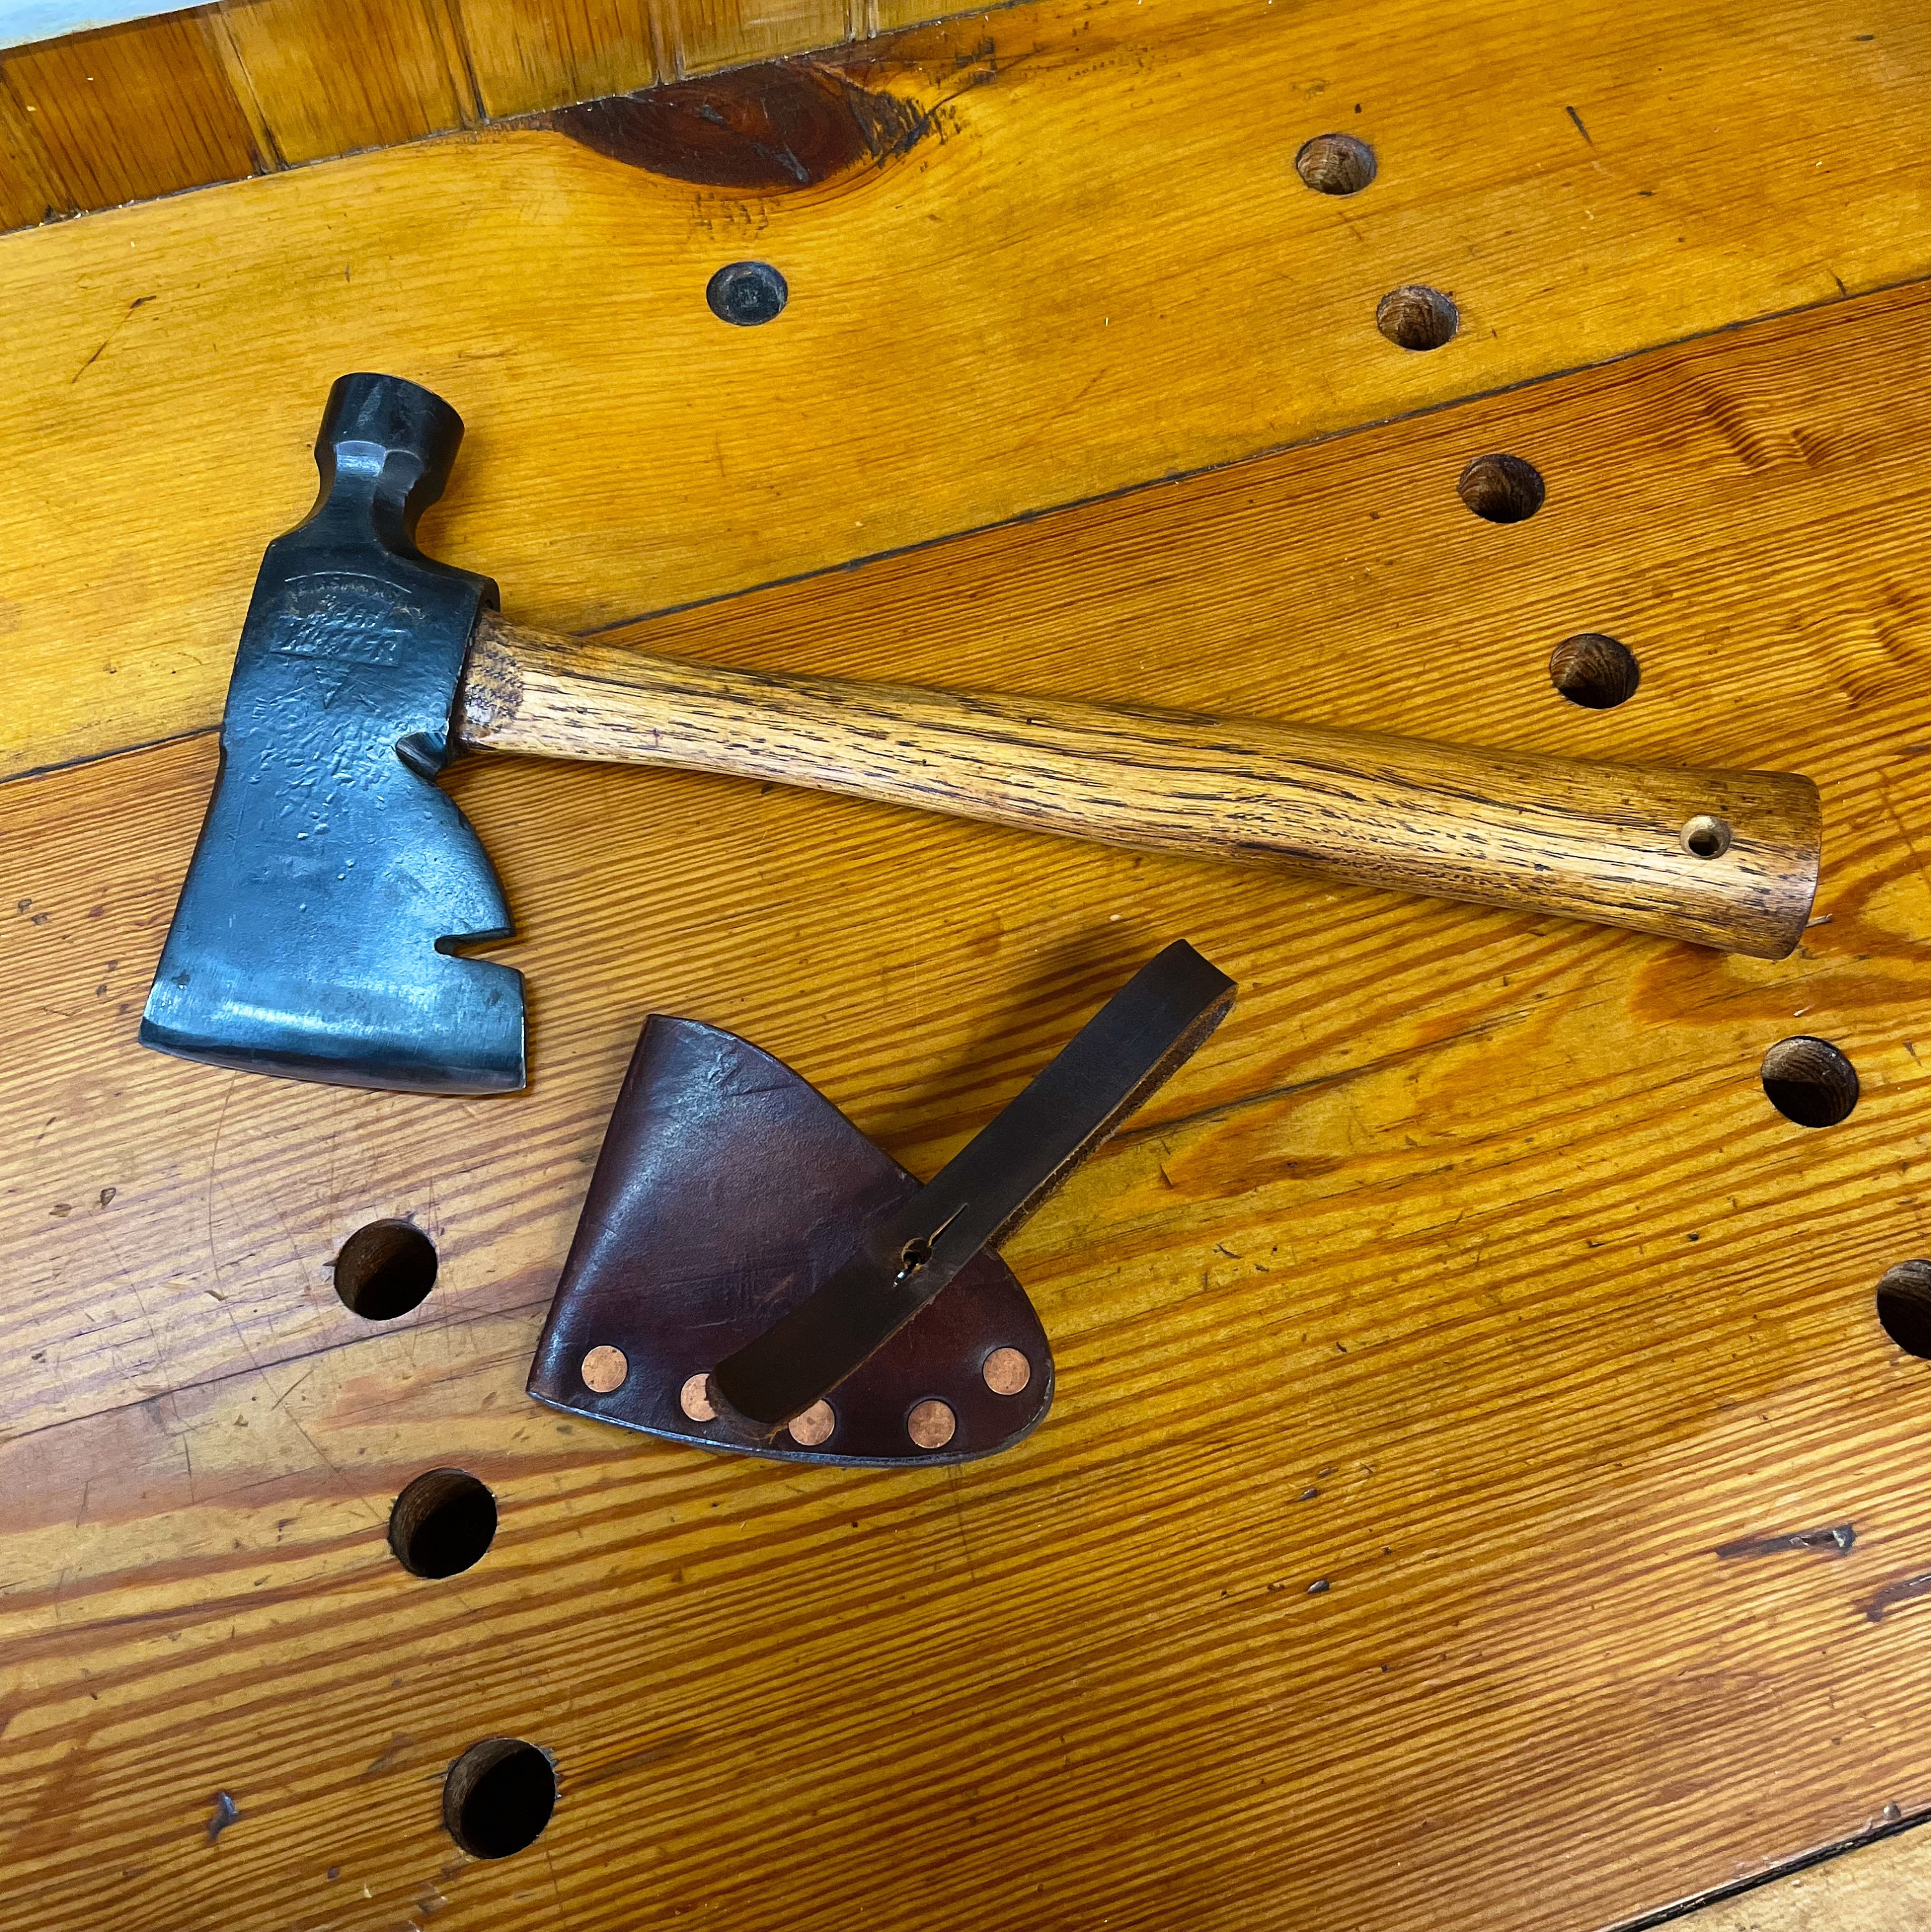 Early Small Tools, Board, Keen Kutter Auction